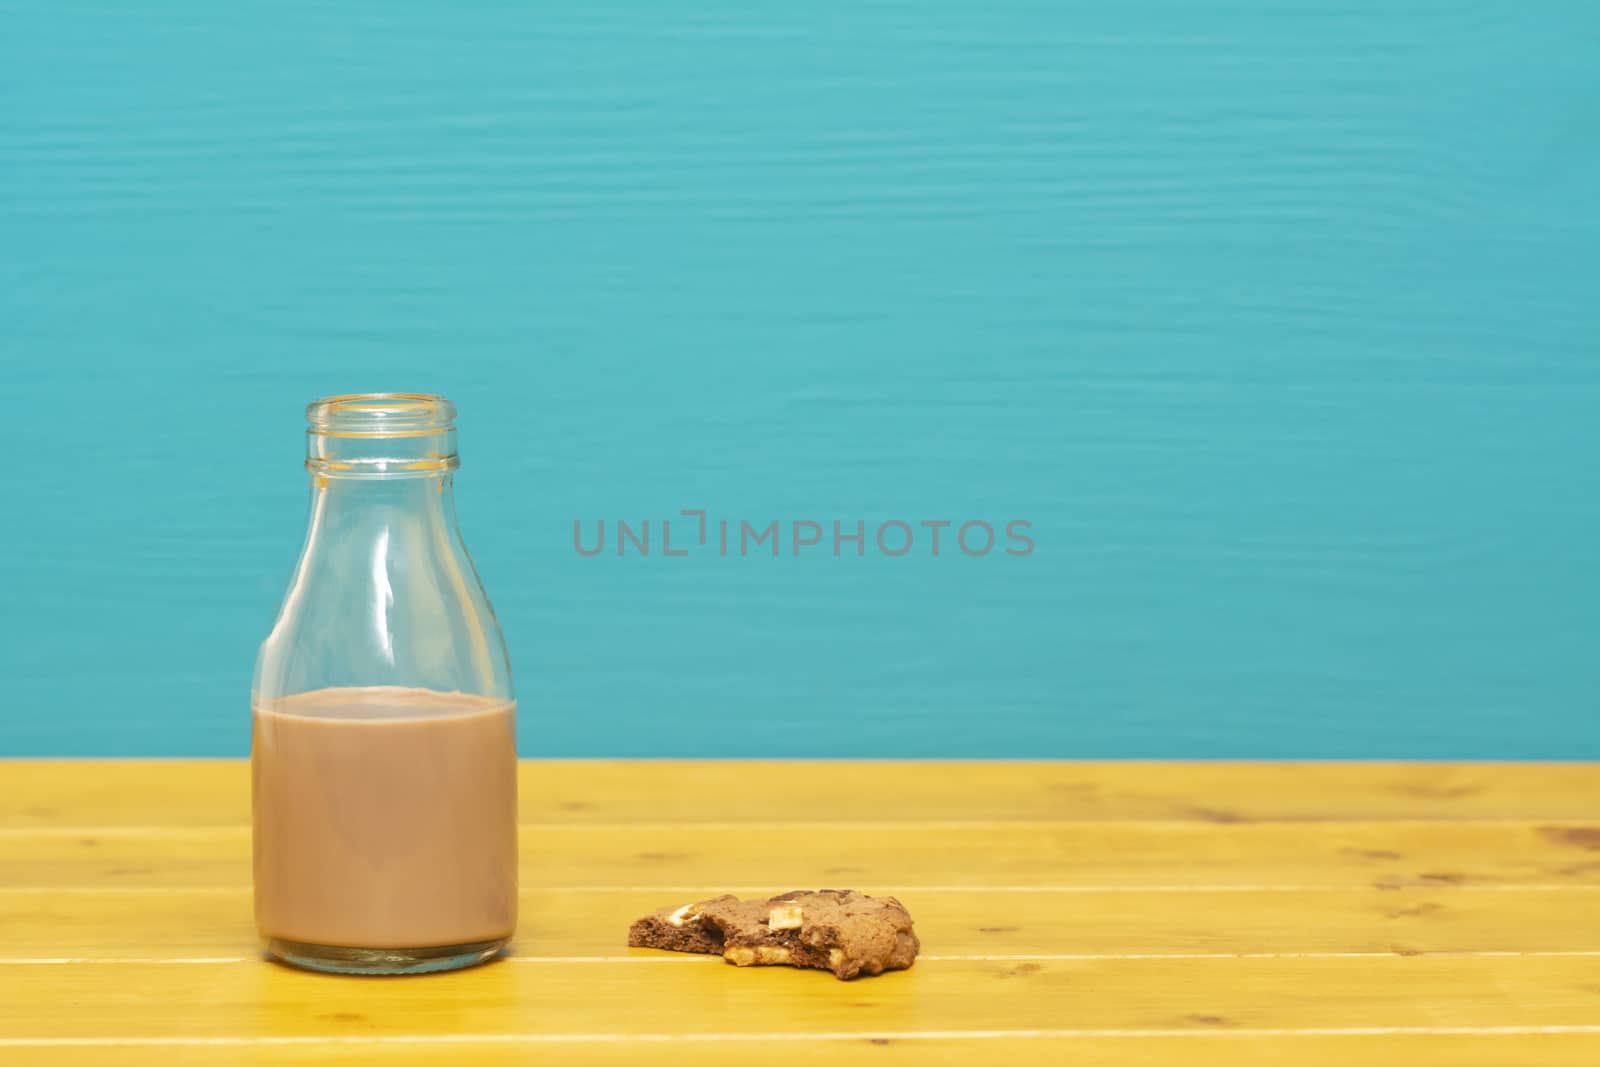 One-third pint glass milk bottle half full with chocolate milkshake and a half-eaten chocolate chip cookie, on a wooden table against a teal background